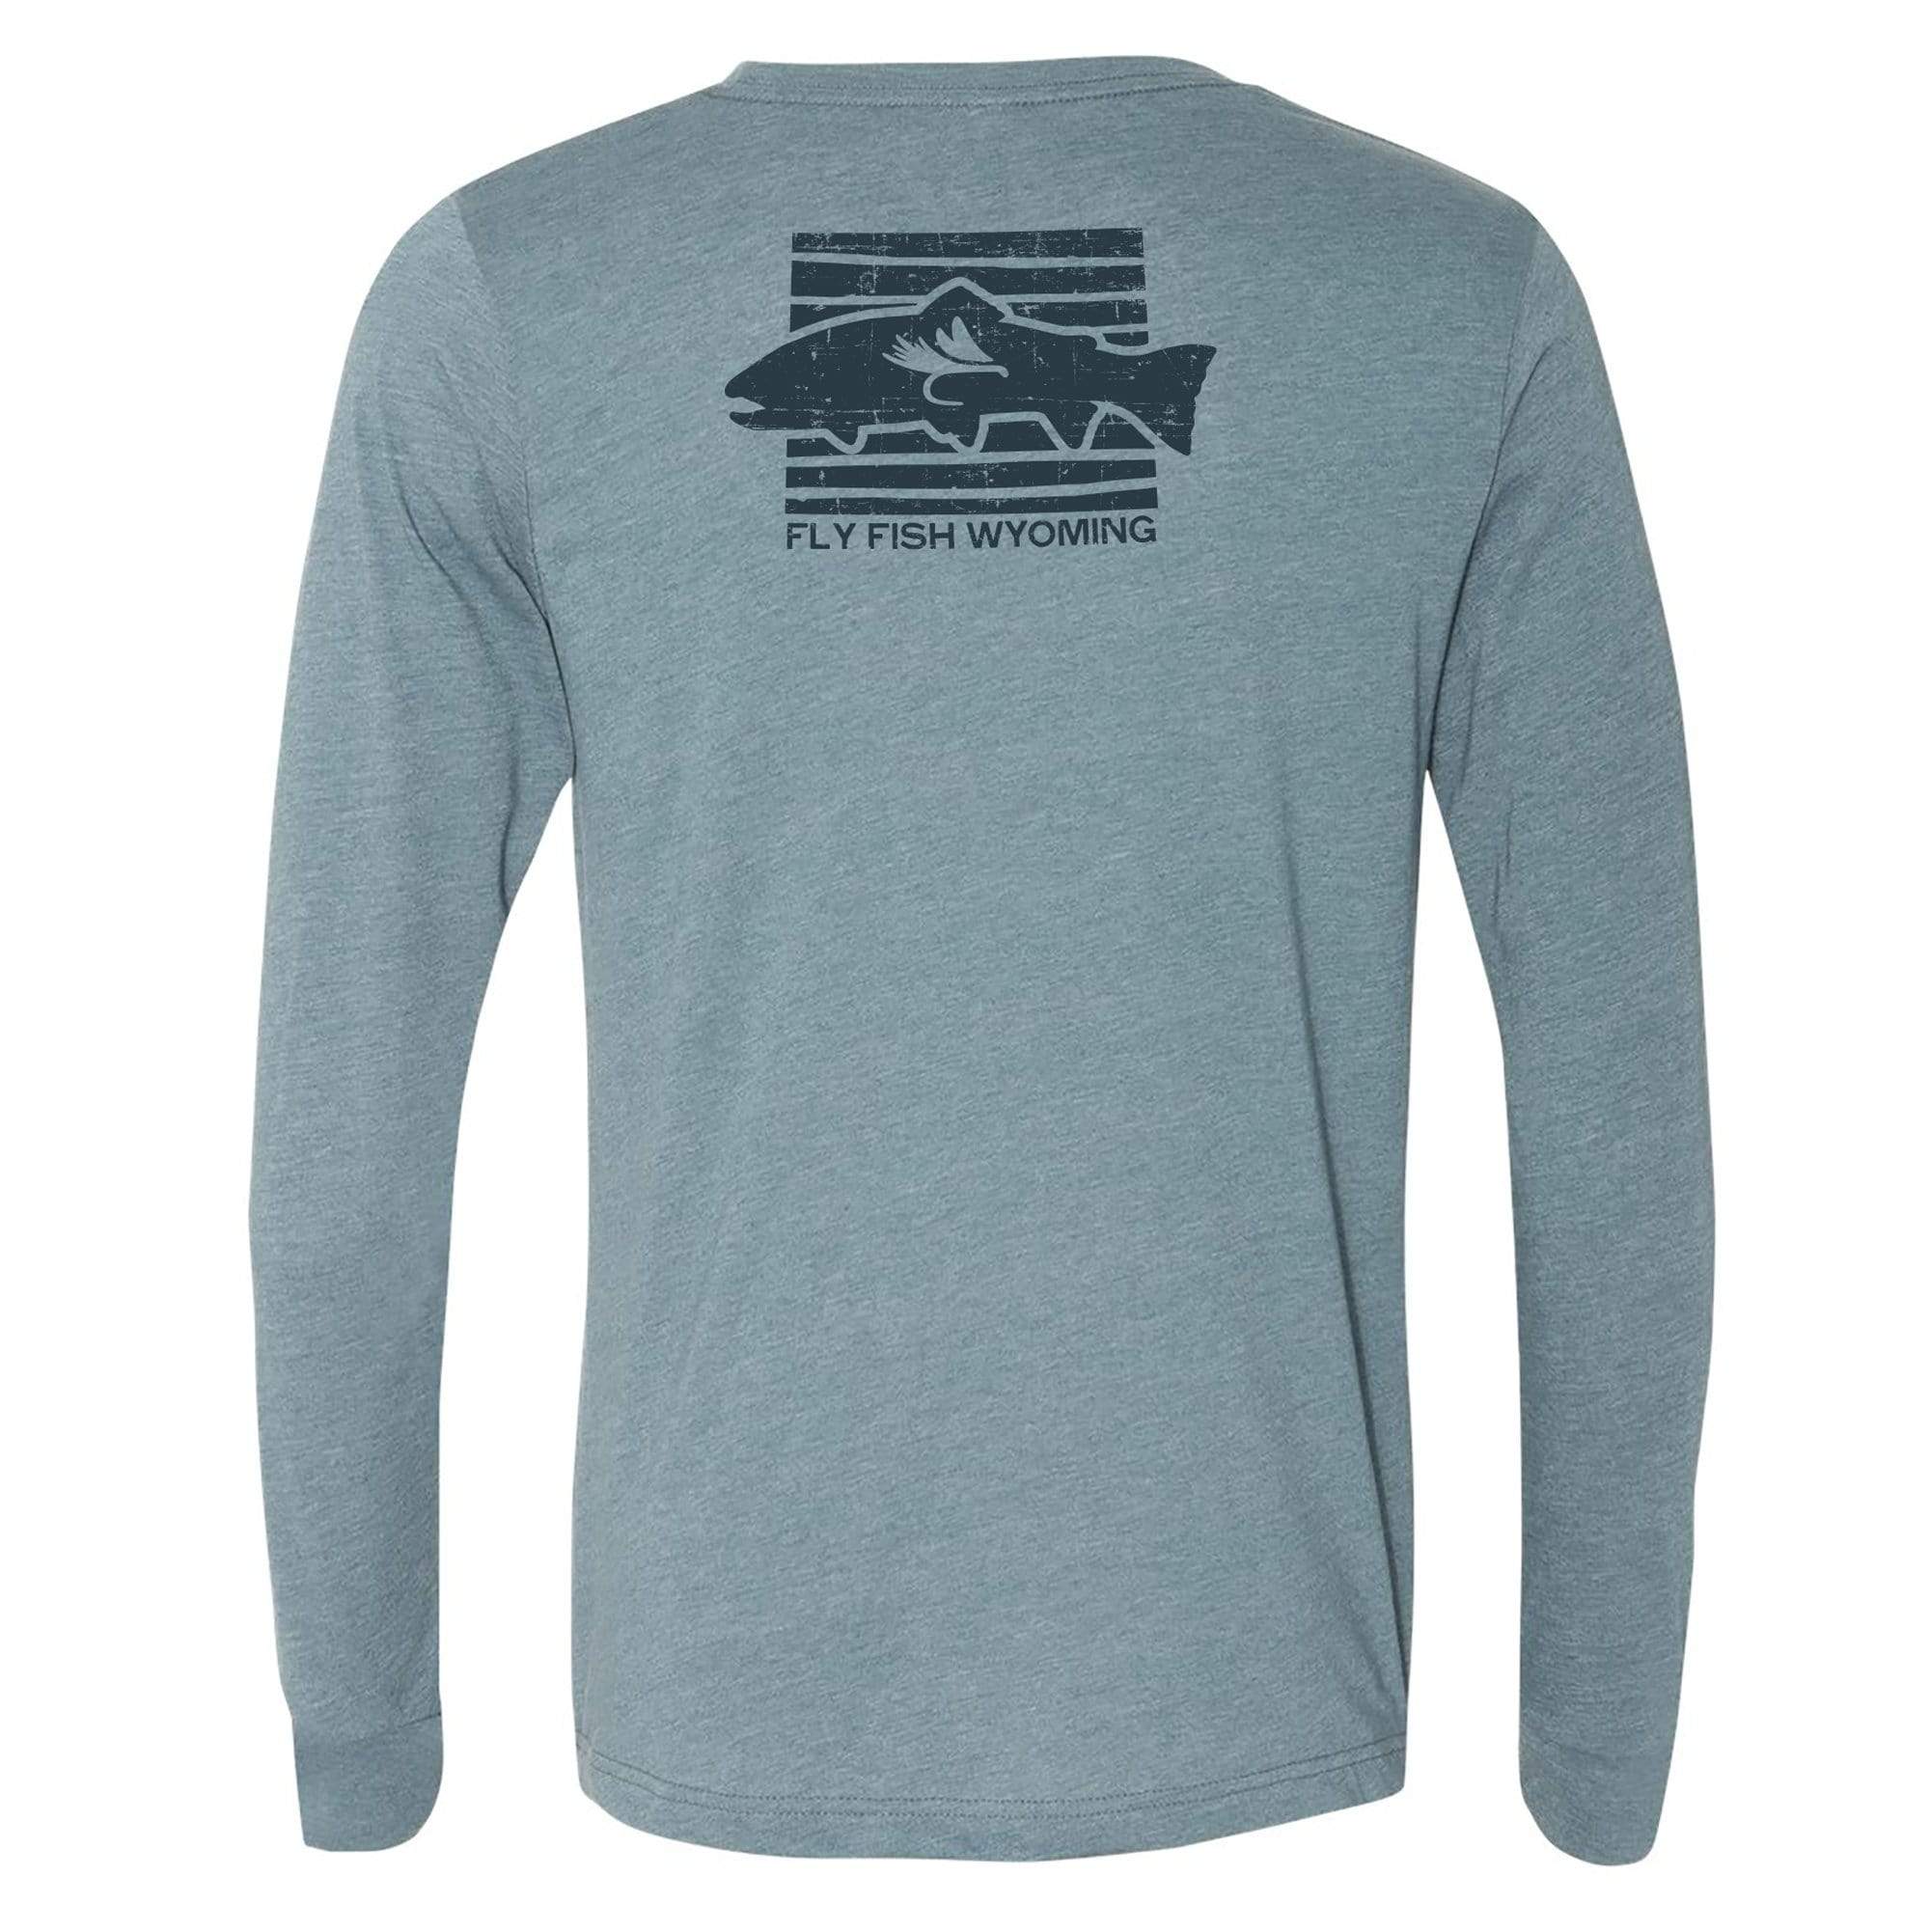 Fly fish Wyoming State Lines Long Sleeve Tee - Denim – Fly Fish